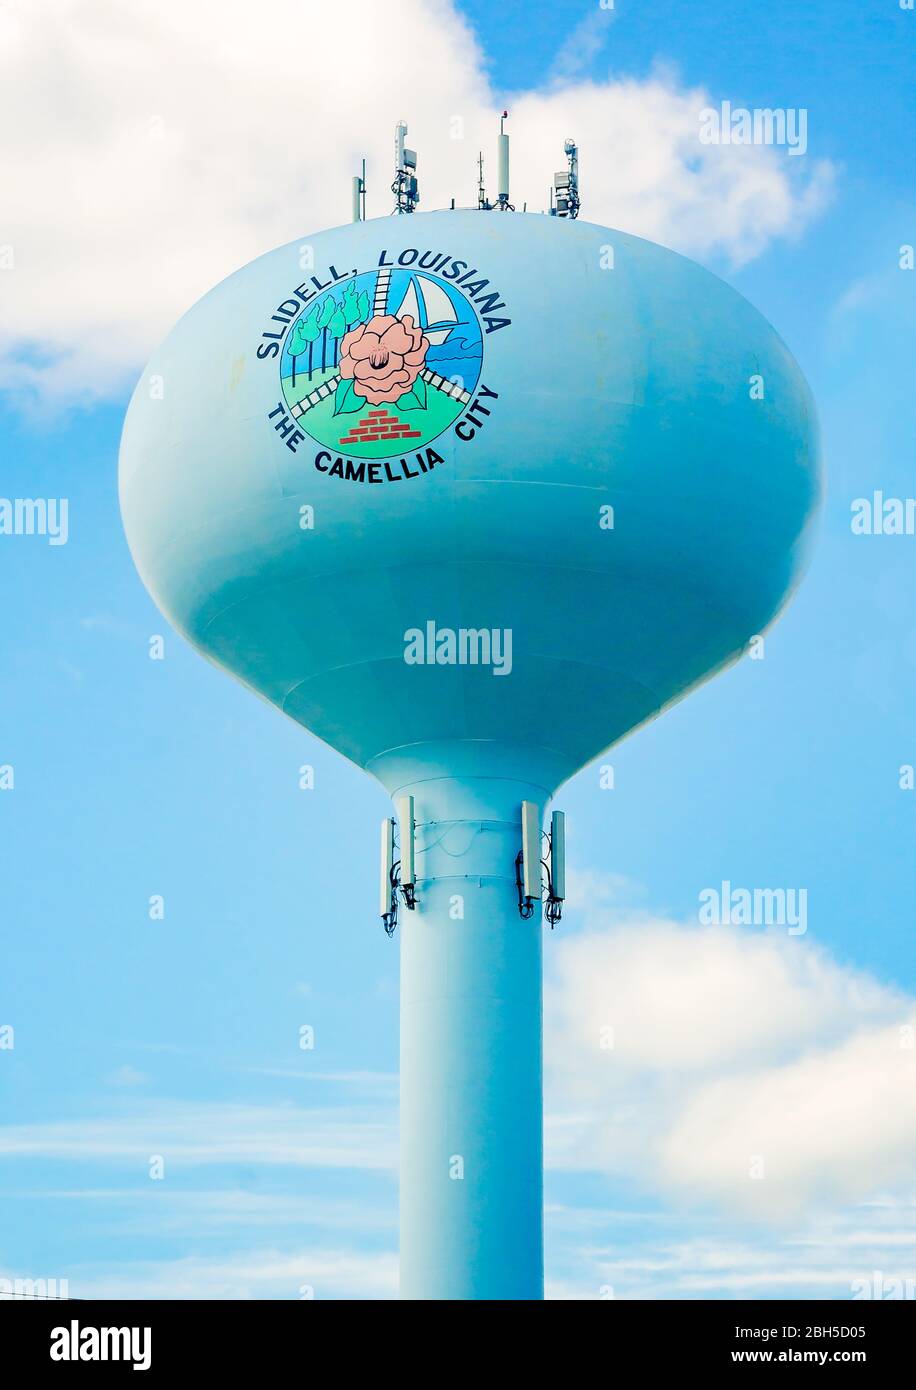 The Slidell water tower features a camellia and proclaims the area as “The Camellia City,” April 20, 2020, in Slidell, Louisiana. Stock Photo